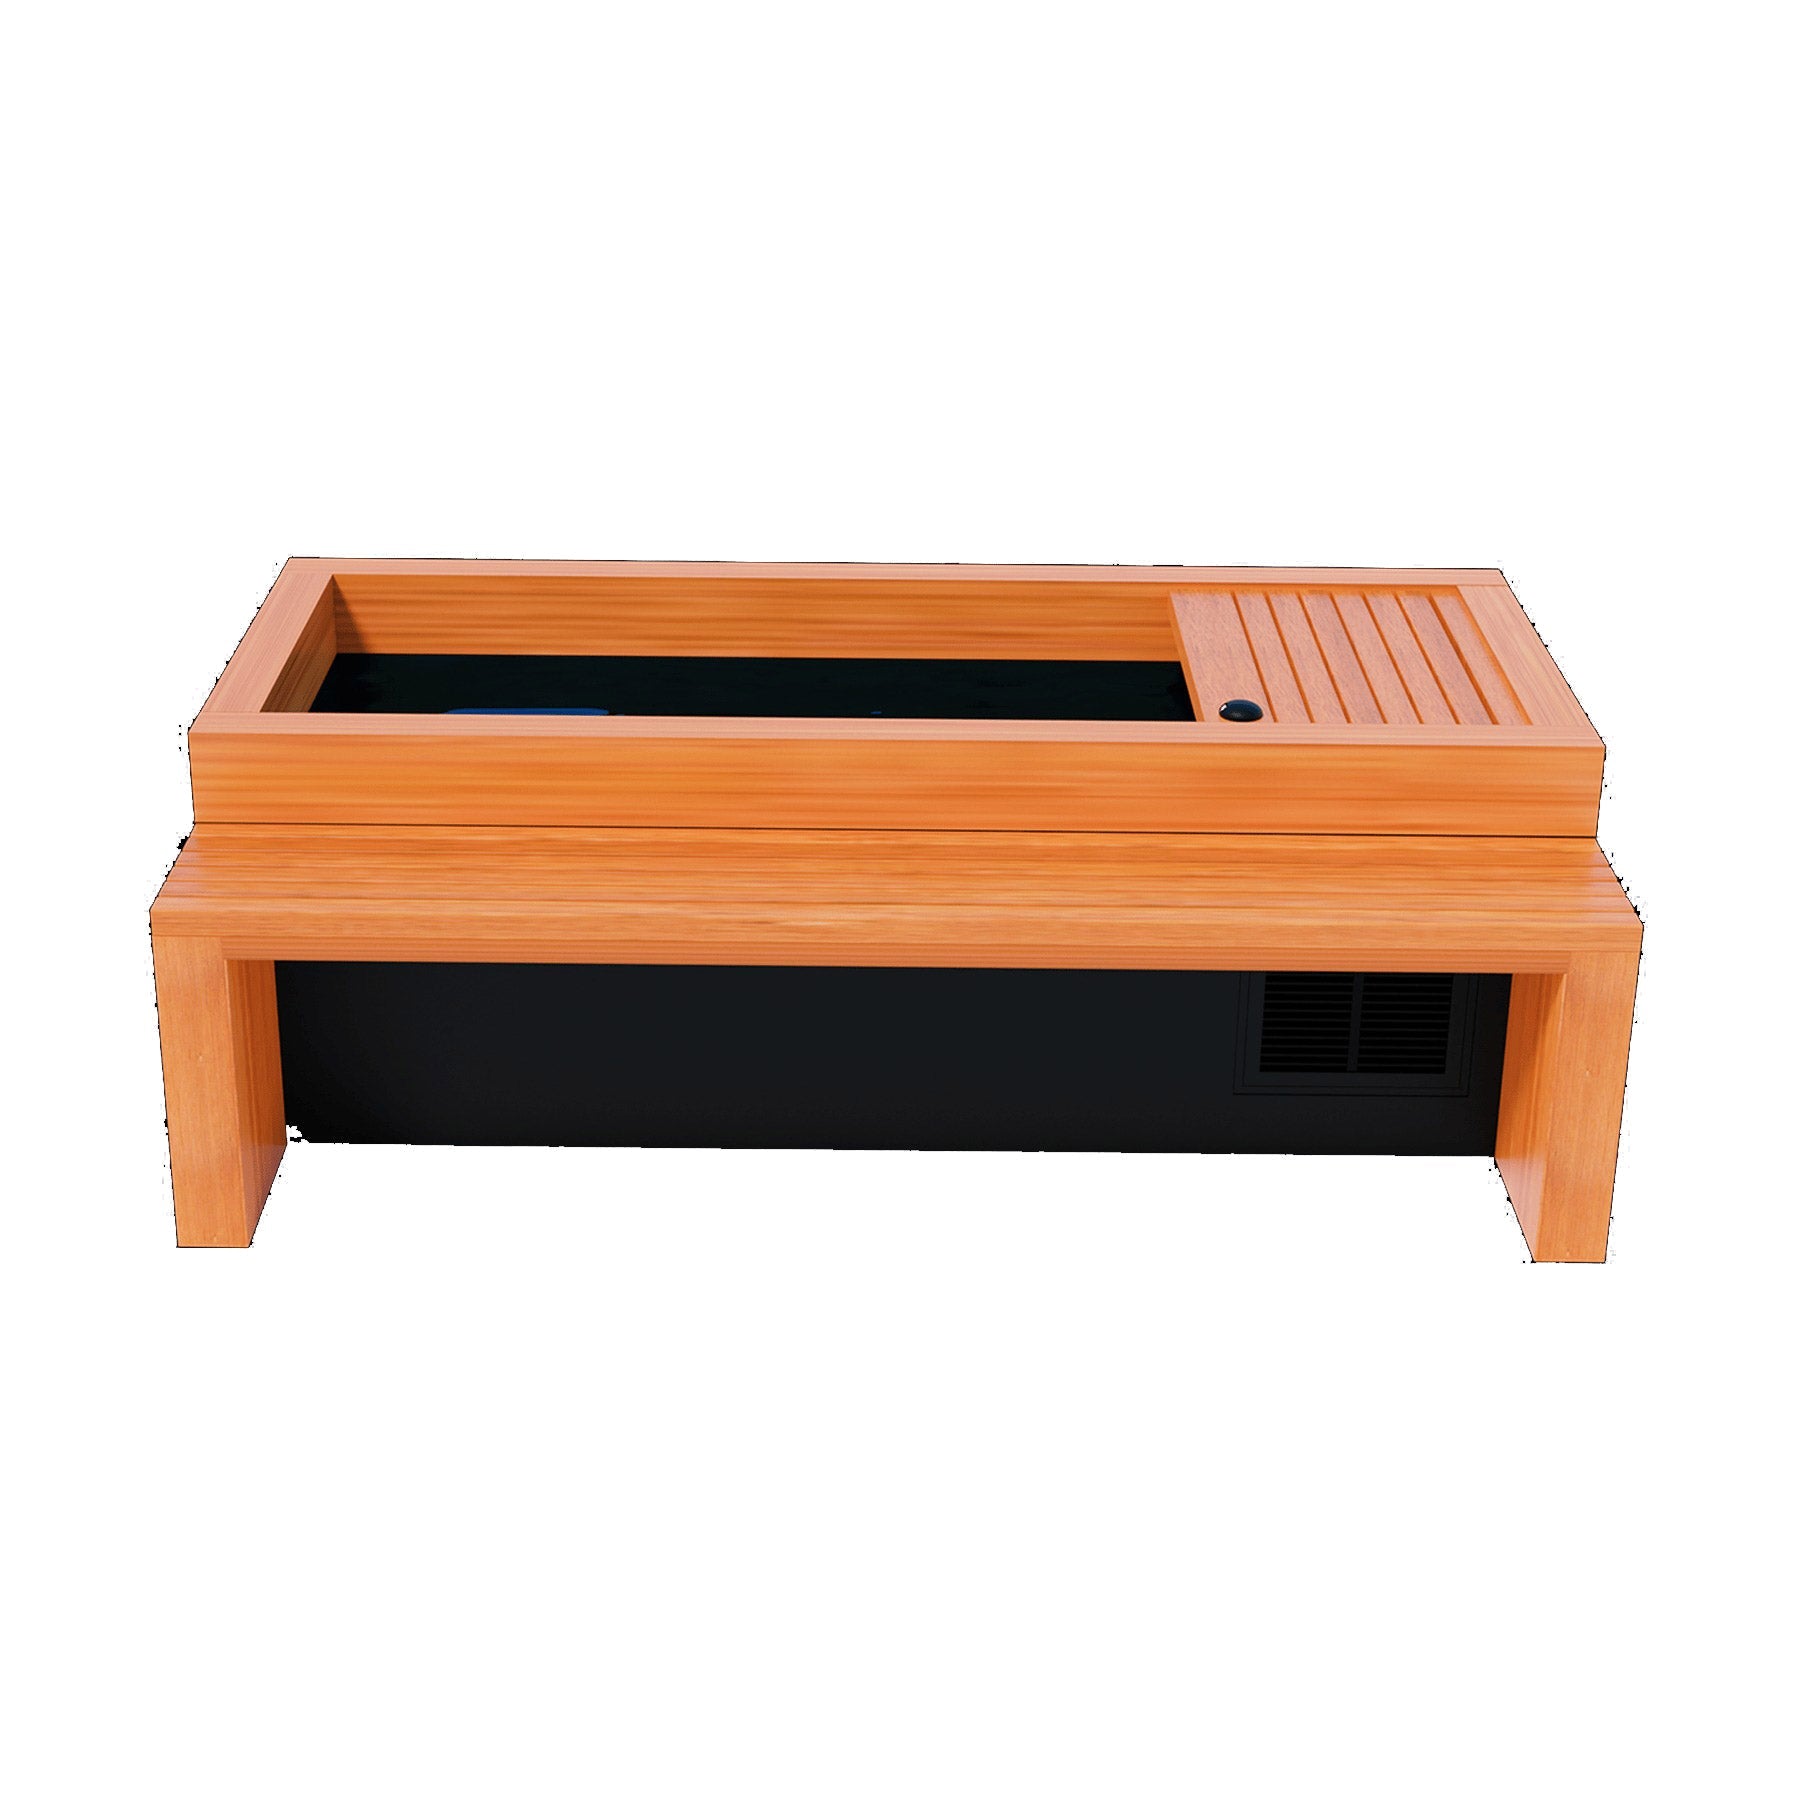 A Medical Sauna wooden hot tub with a black lid equipped with an Essential Oil Infuser.